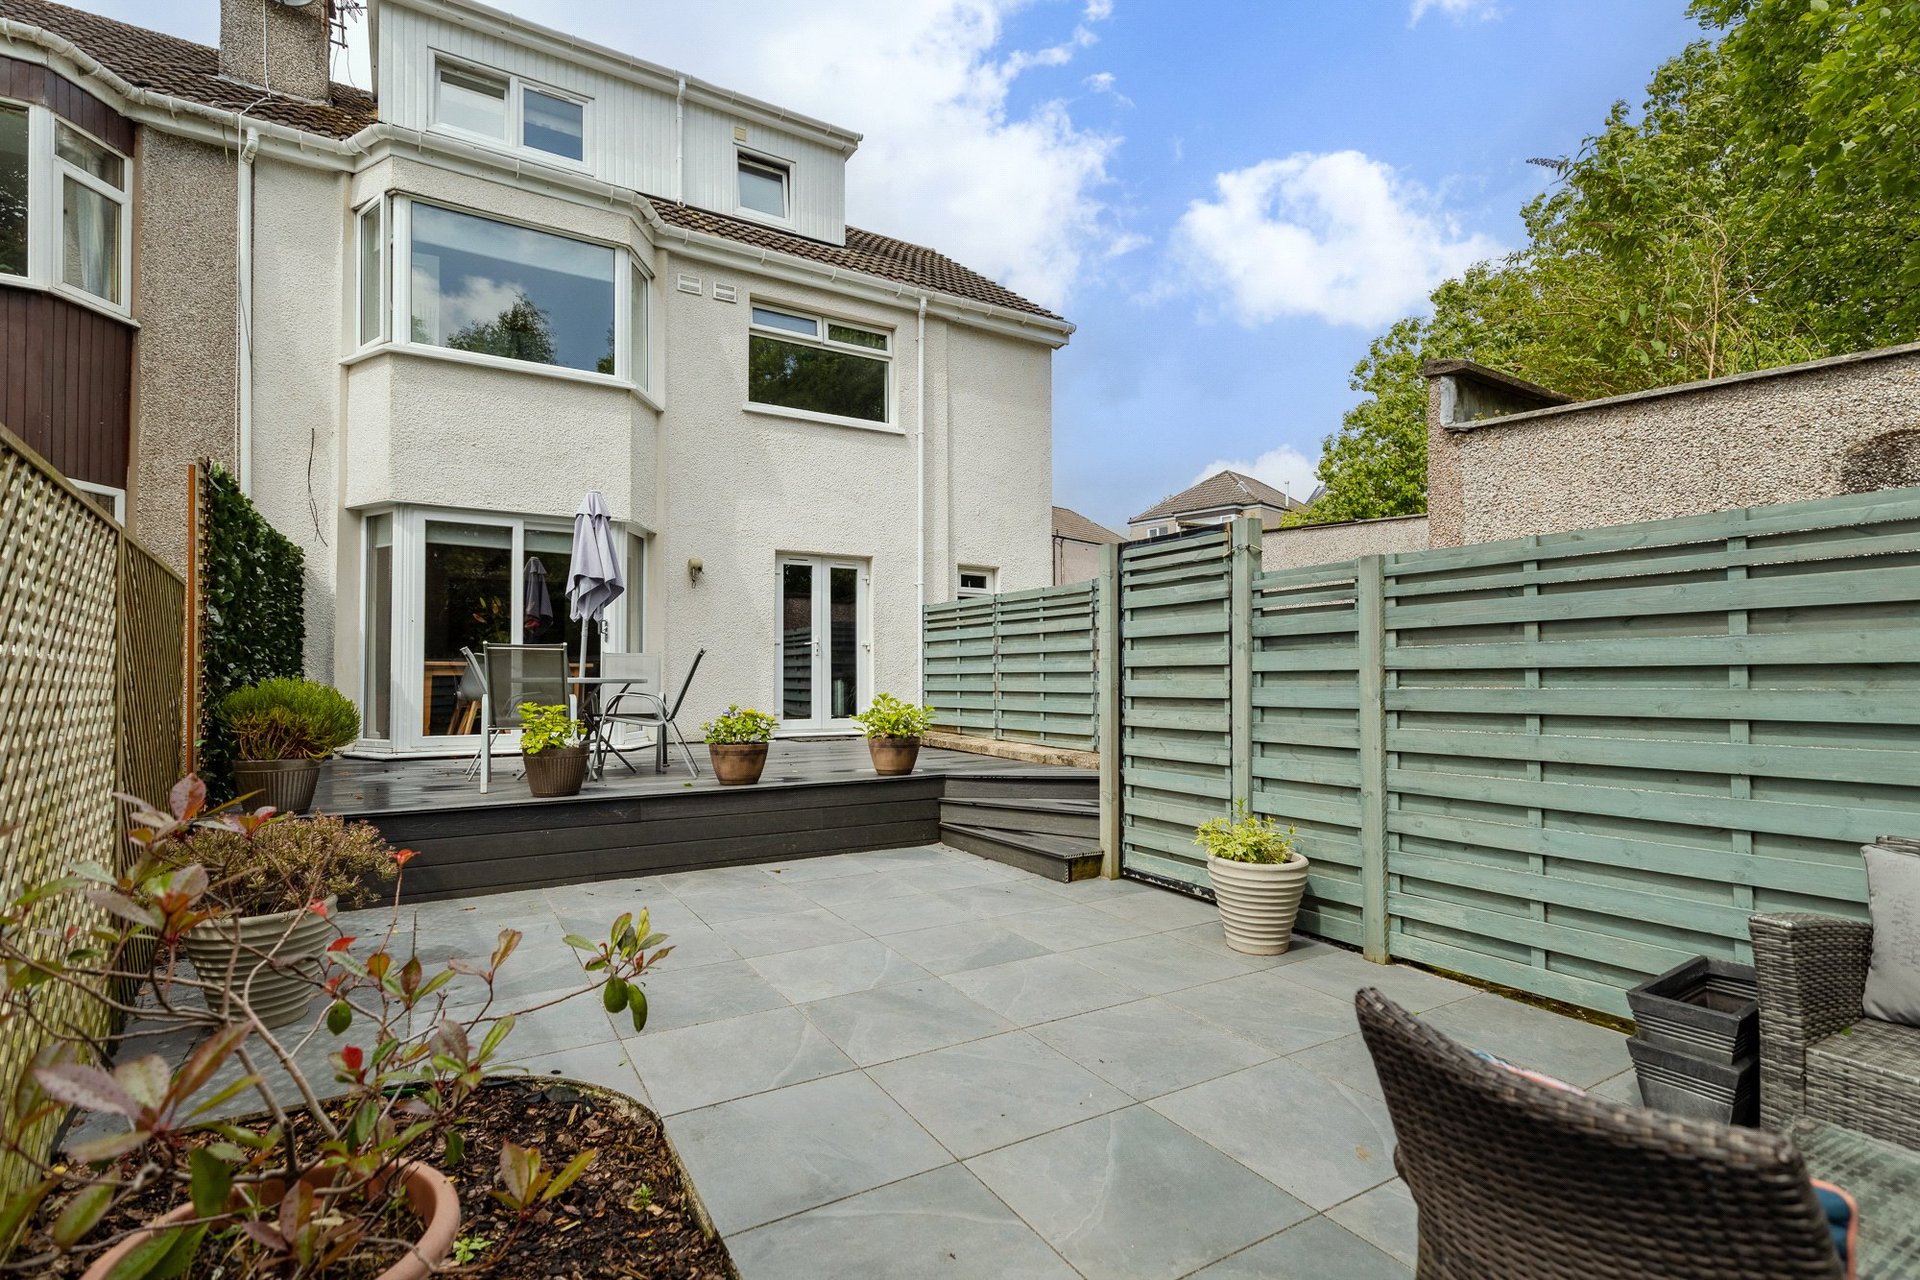 68 Golf View, Bearsden, Glasgow, G61 4HH - Picture #2